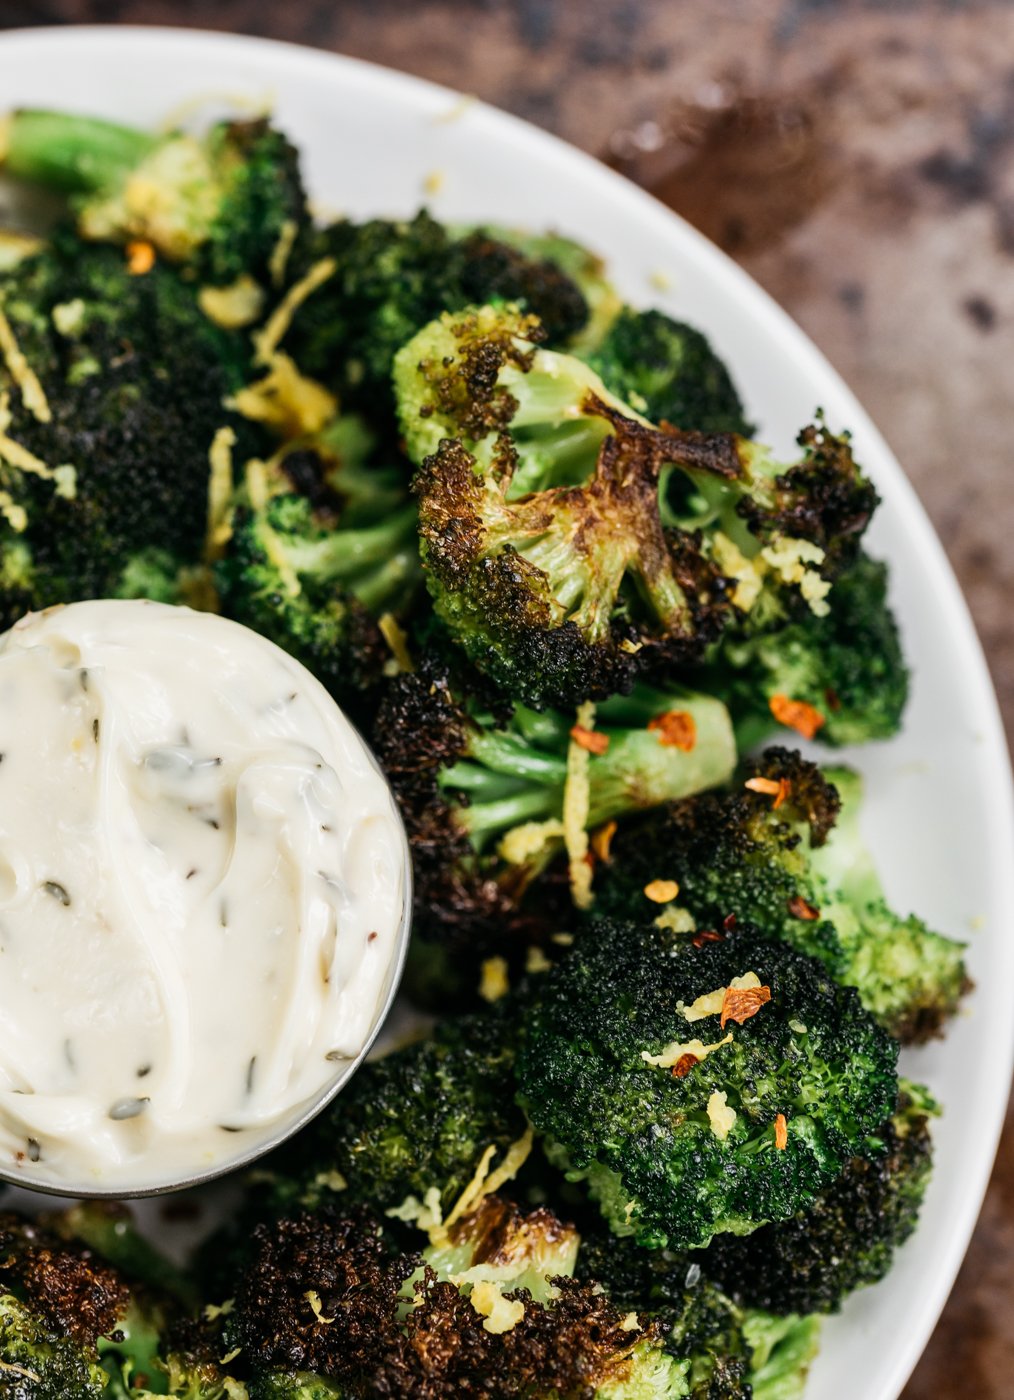 fried broccoli recipe, fried broccoli, herbed aioli, louana coconut oil, southern cooking blog